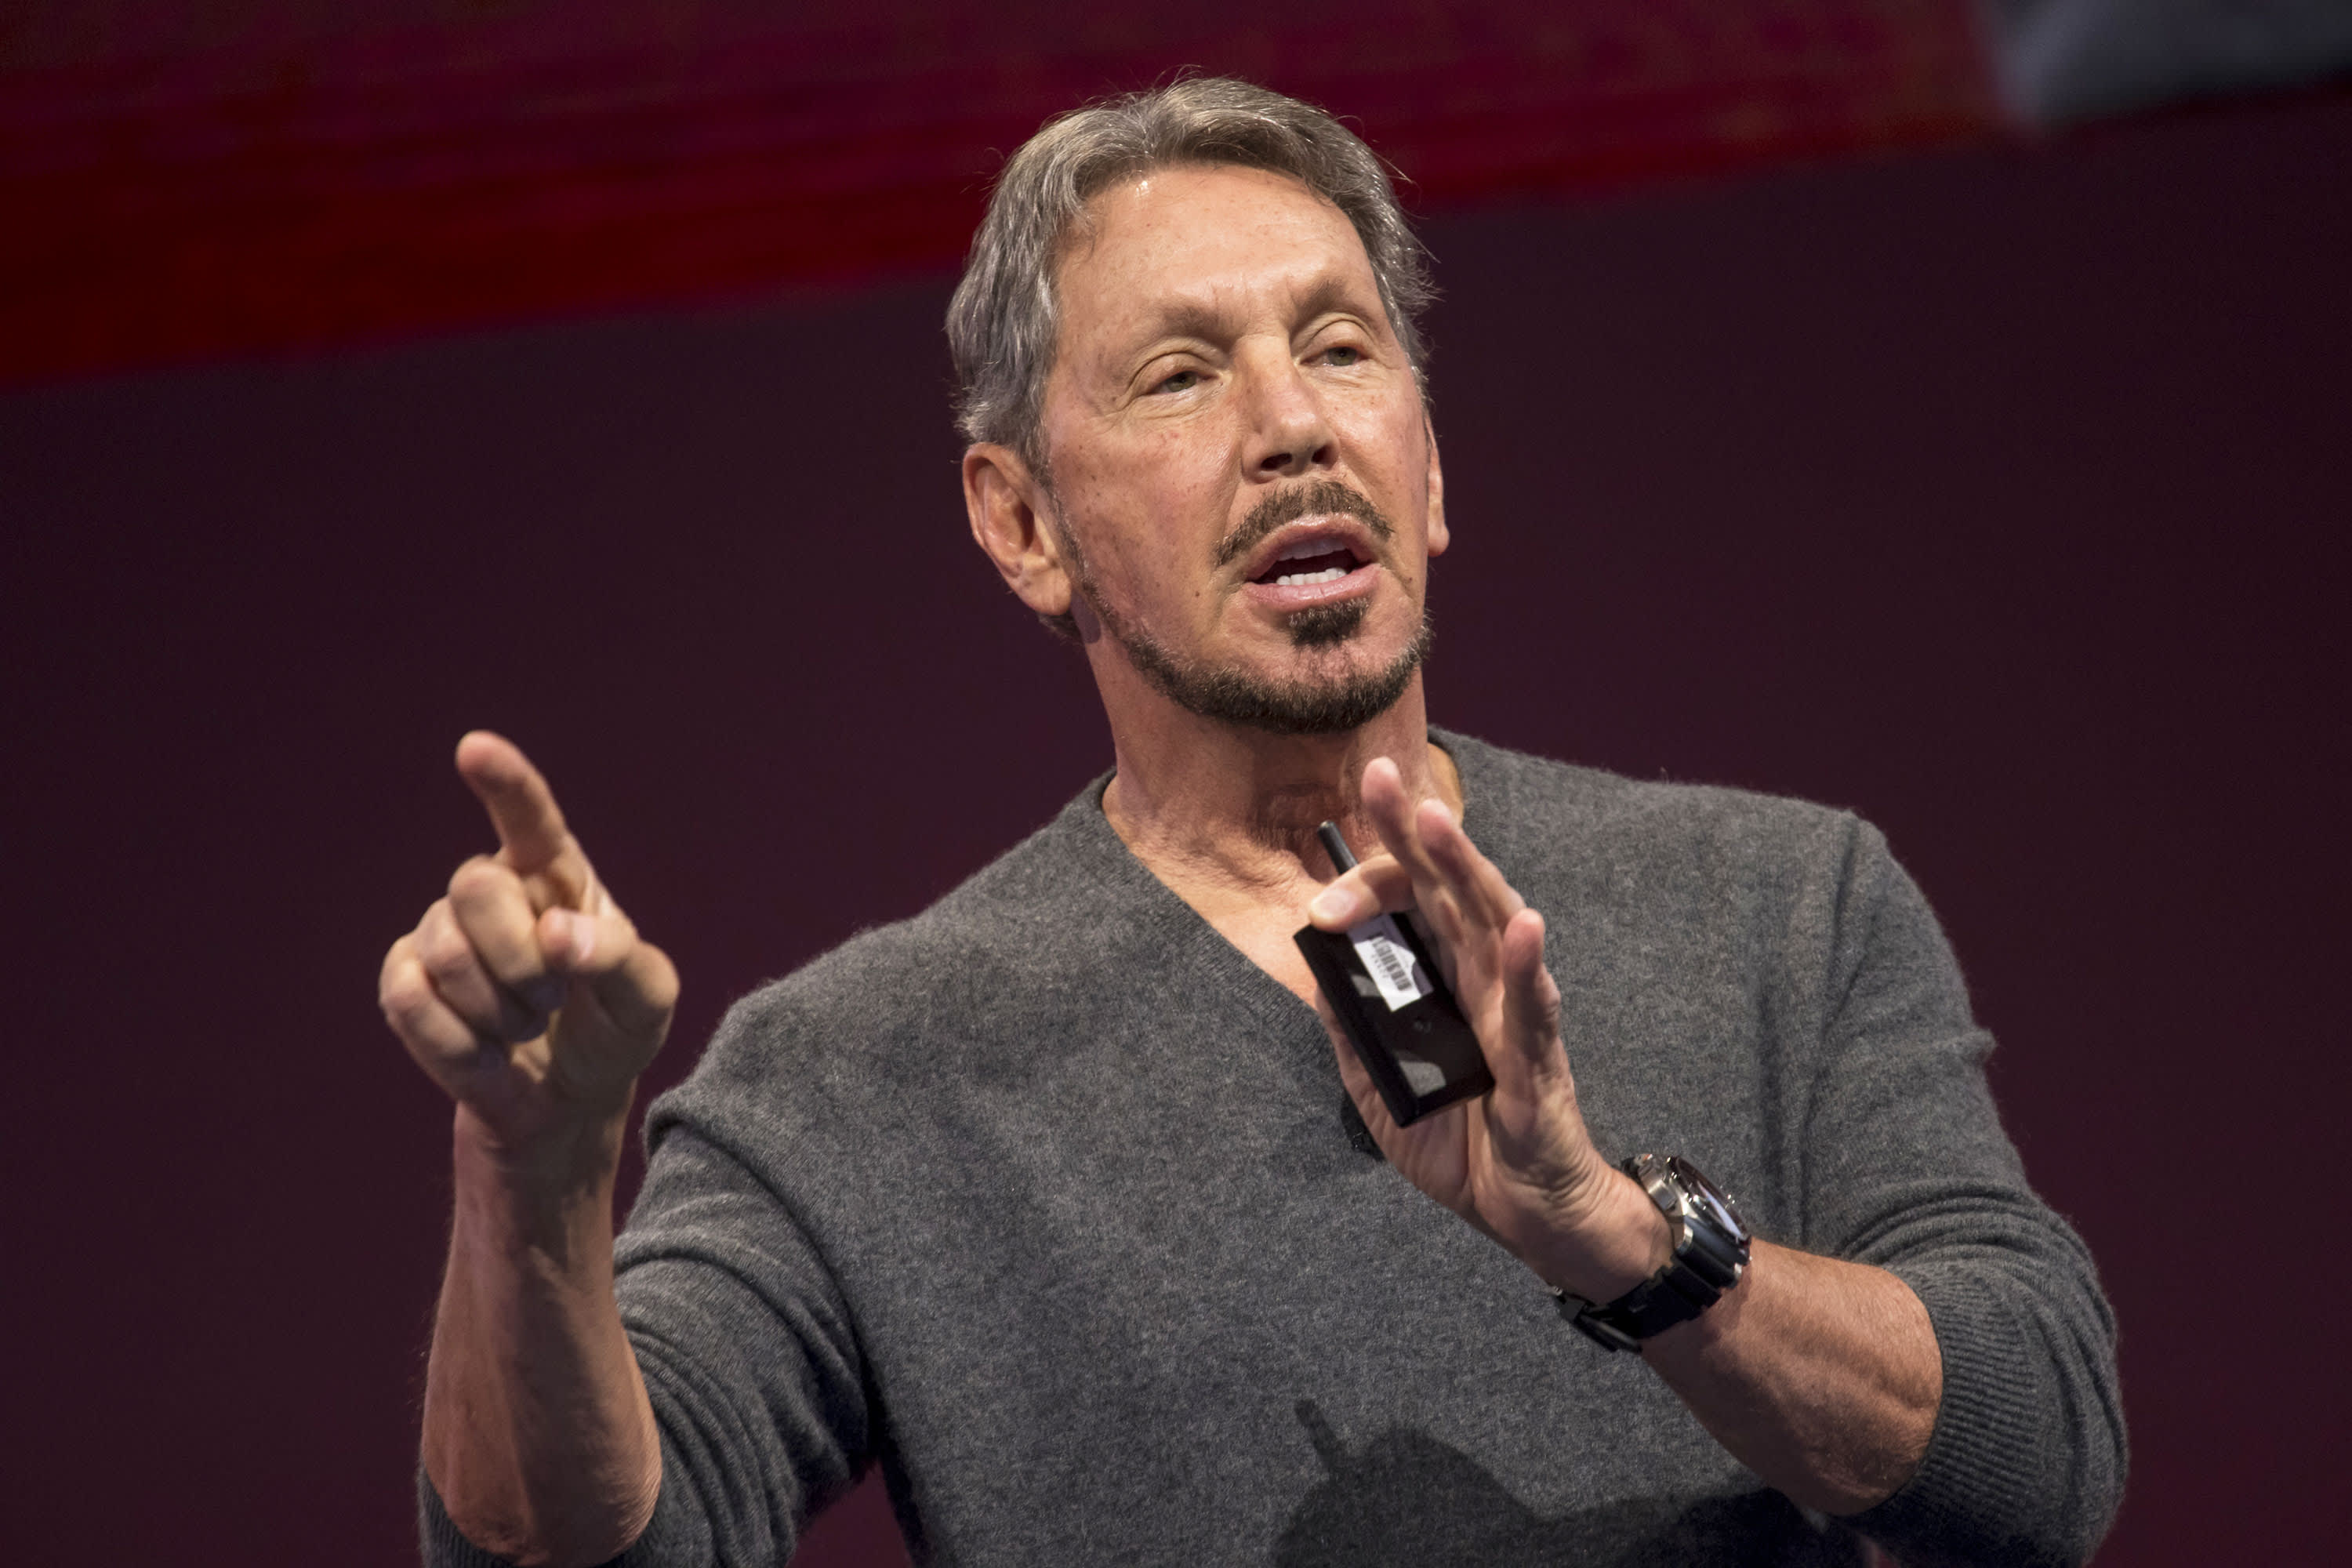 Google will stop using Oracle financing software and switch to SAP